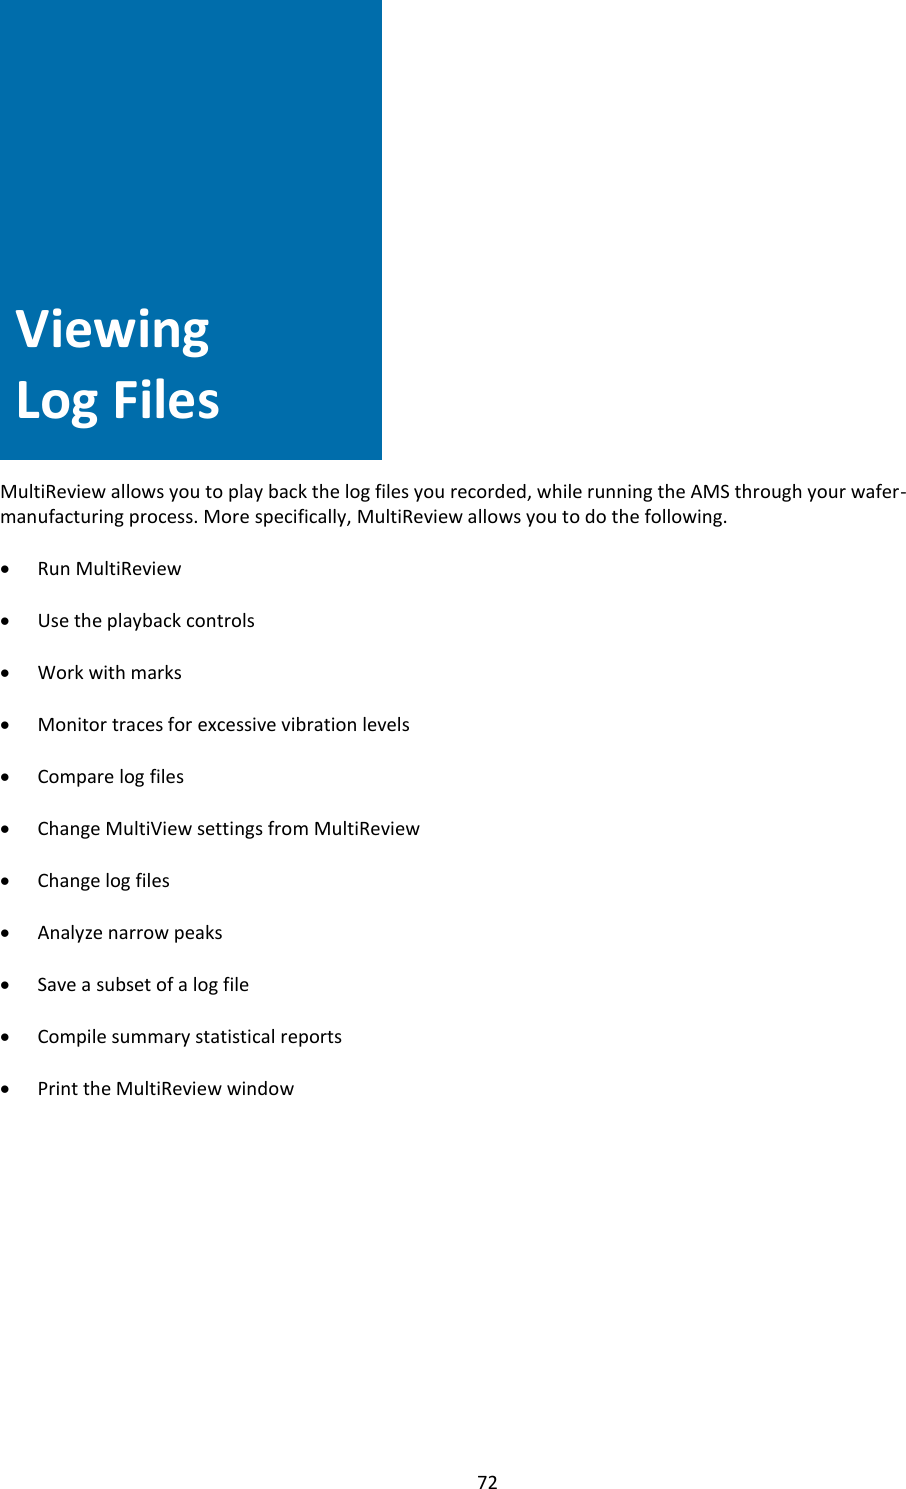   72                 Viewing Log Files   MultiReview allows you to play back the log files you recorded, while running the AMS through your wafer-manufacturing process. More specifically, MultiReview allows you to do the following.  • Run MultiReview  • Use the playback controls  • Work with marks  • Monitor traces for excessive vibration levels  • Compare log files  • Change MultiView settings from MultiReview  • Change log files  • Analyze narrow peaks  • Save a subset of a log file  • Compile summary statistical reports  • Print the MultiReview window              Viewing Log Files 